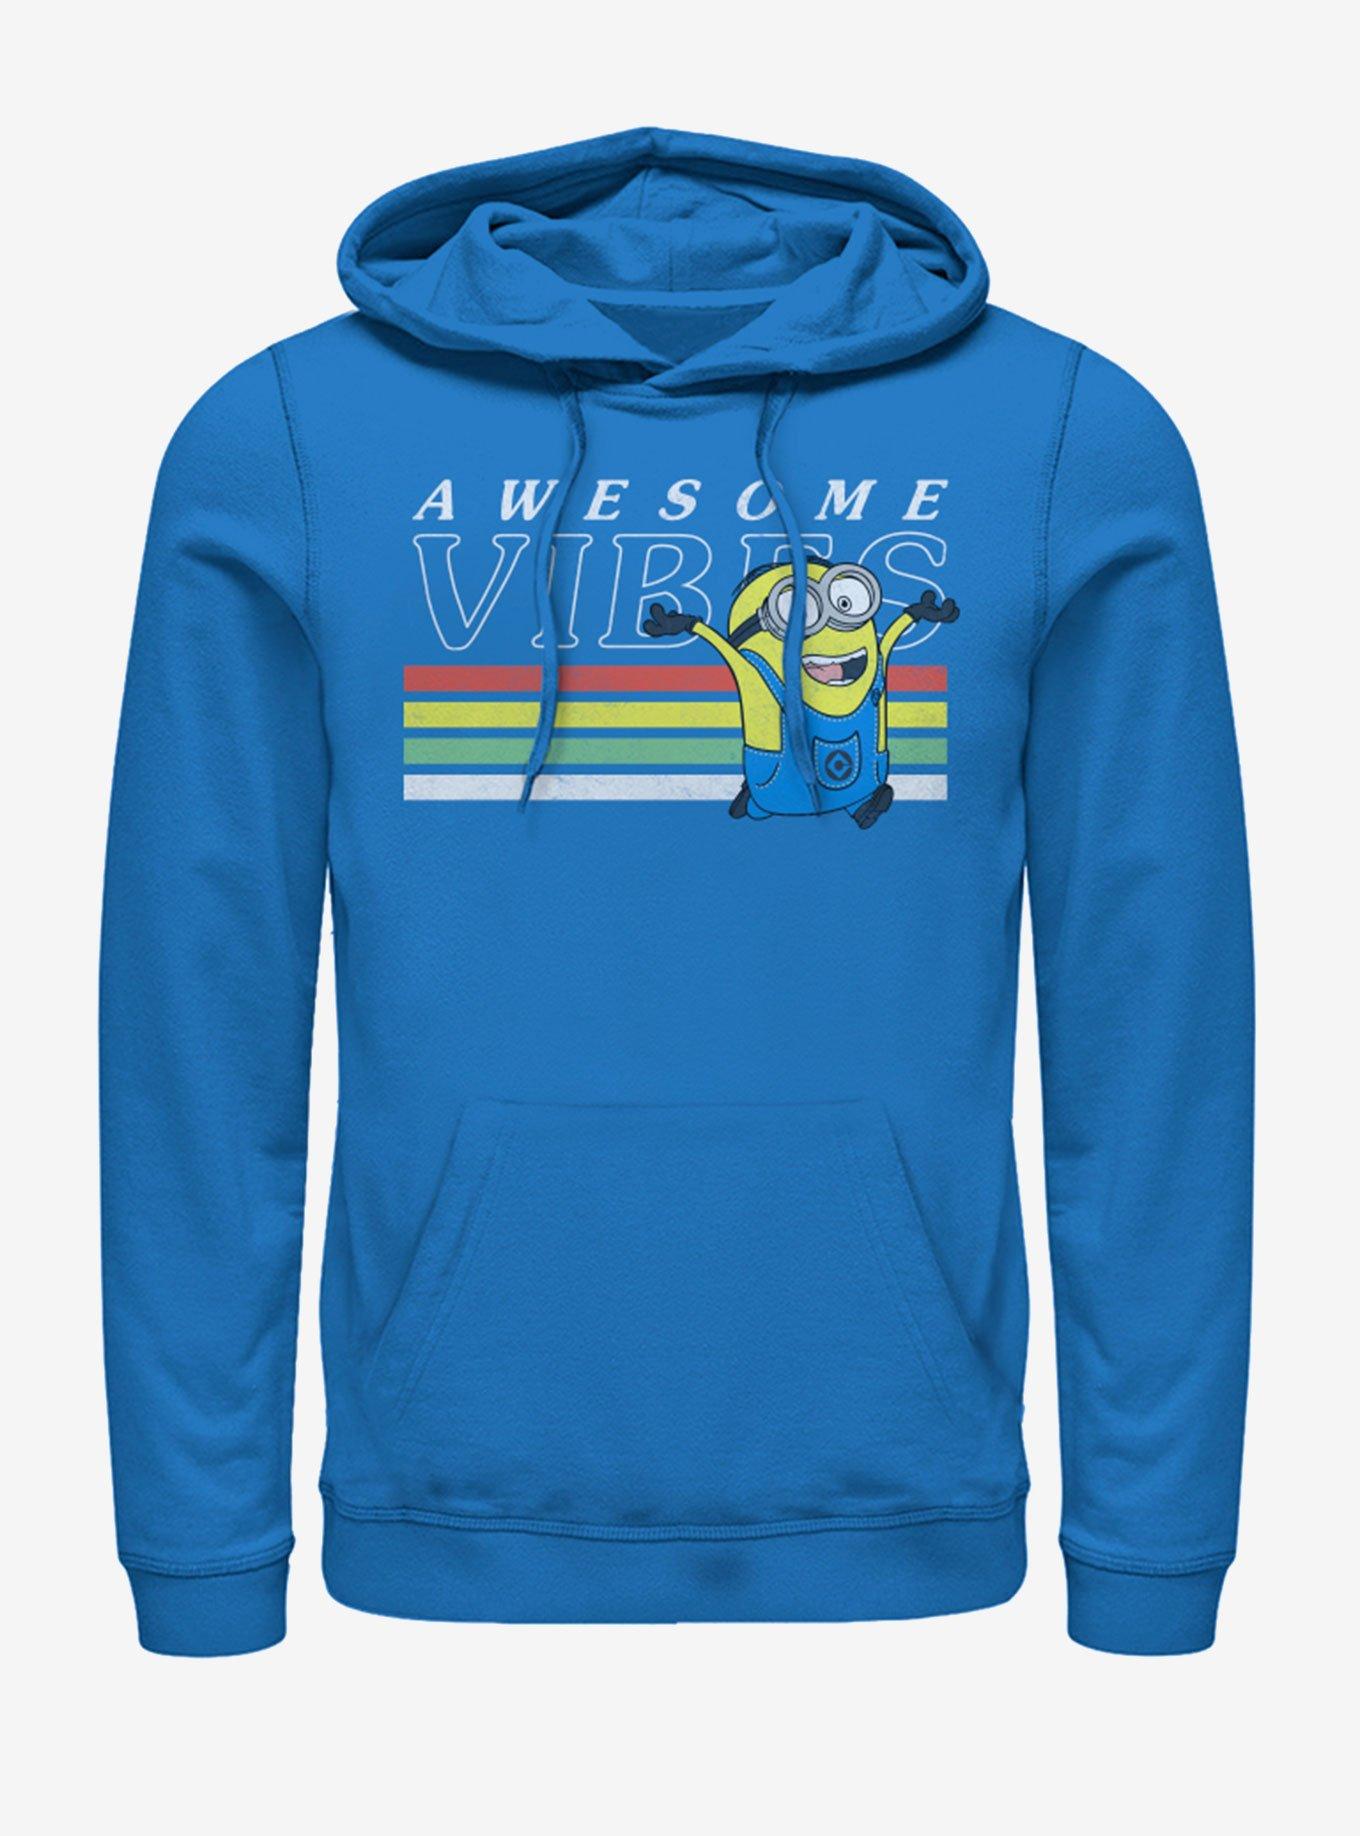 Minions Awesome Vibes Hoodie, ROYAL, hi-res